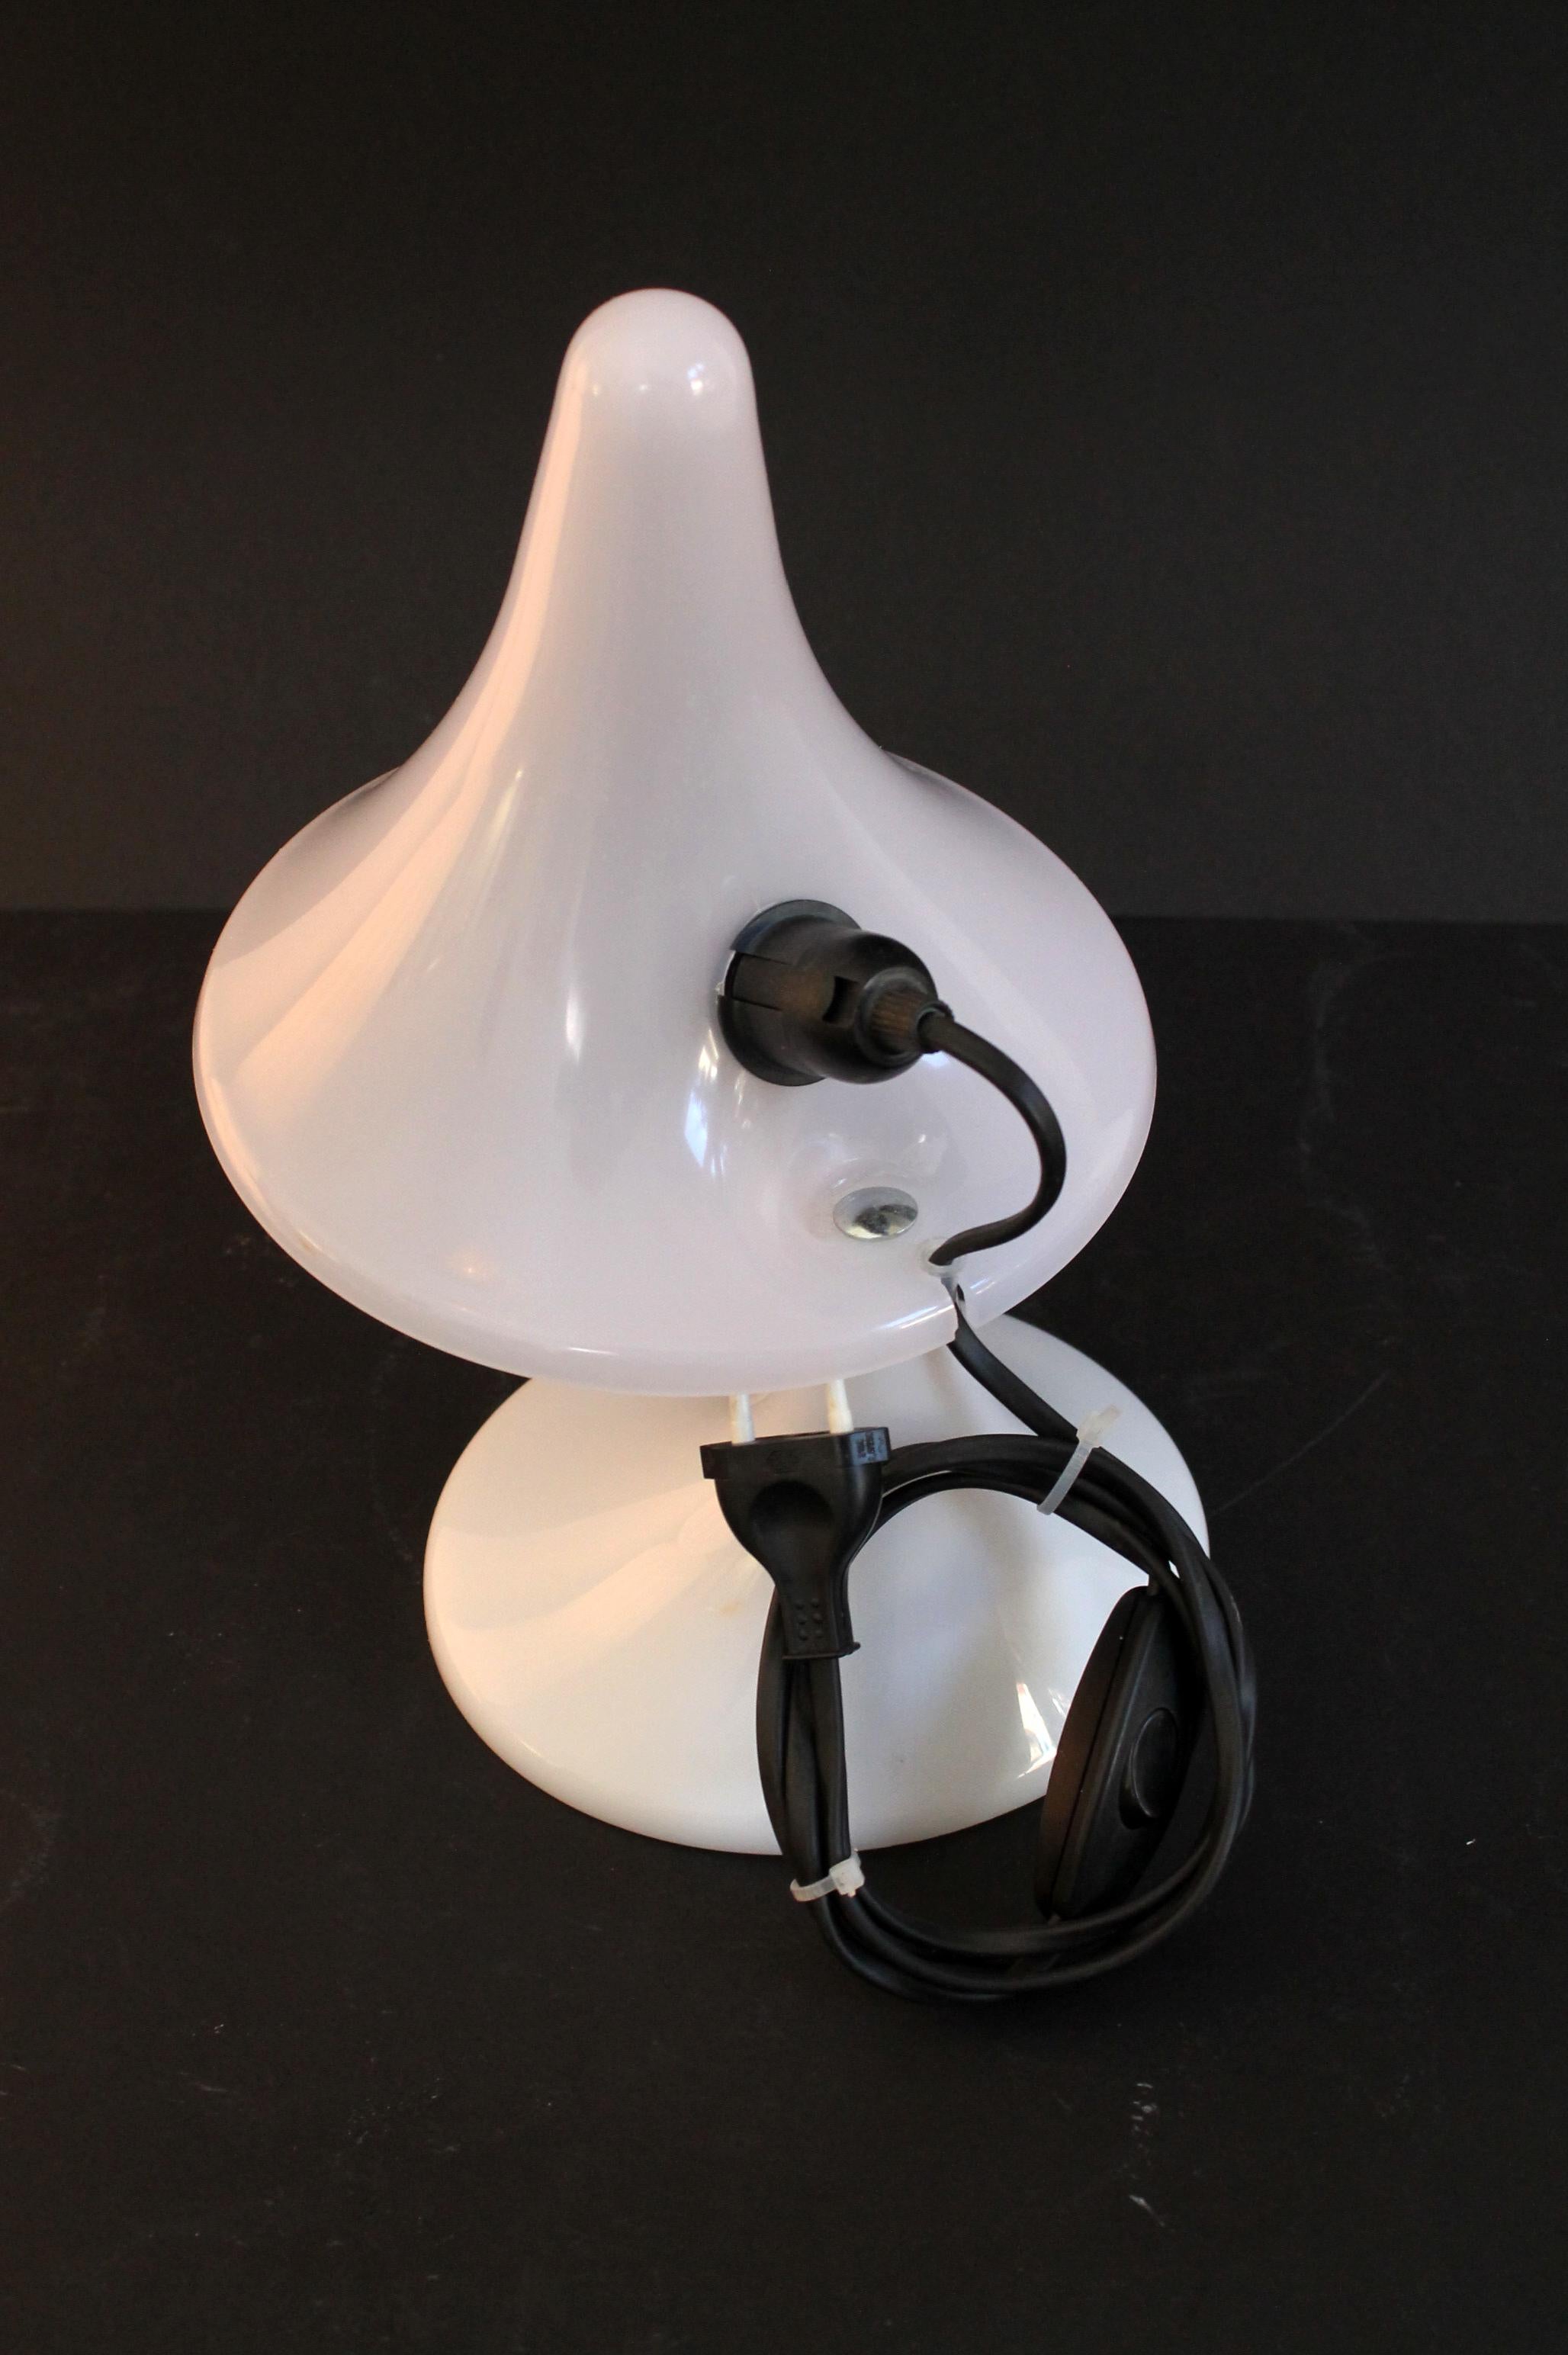 Original Art Plex desk lamp

Manufacturer: Art Plex SAS
Origin: Italy
Condition: Excellent with NO defects to report, the two acrylic parts are perfectly intact, with no cracks, and original clean wiring system 
Sockets type: Regular E14 bulb -